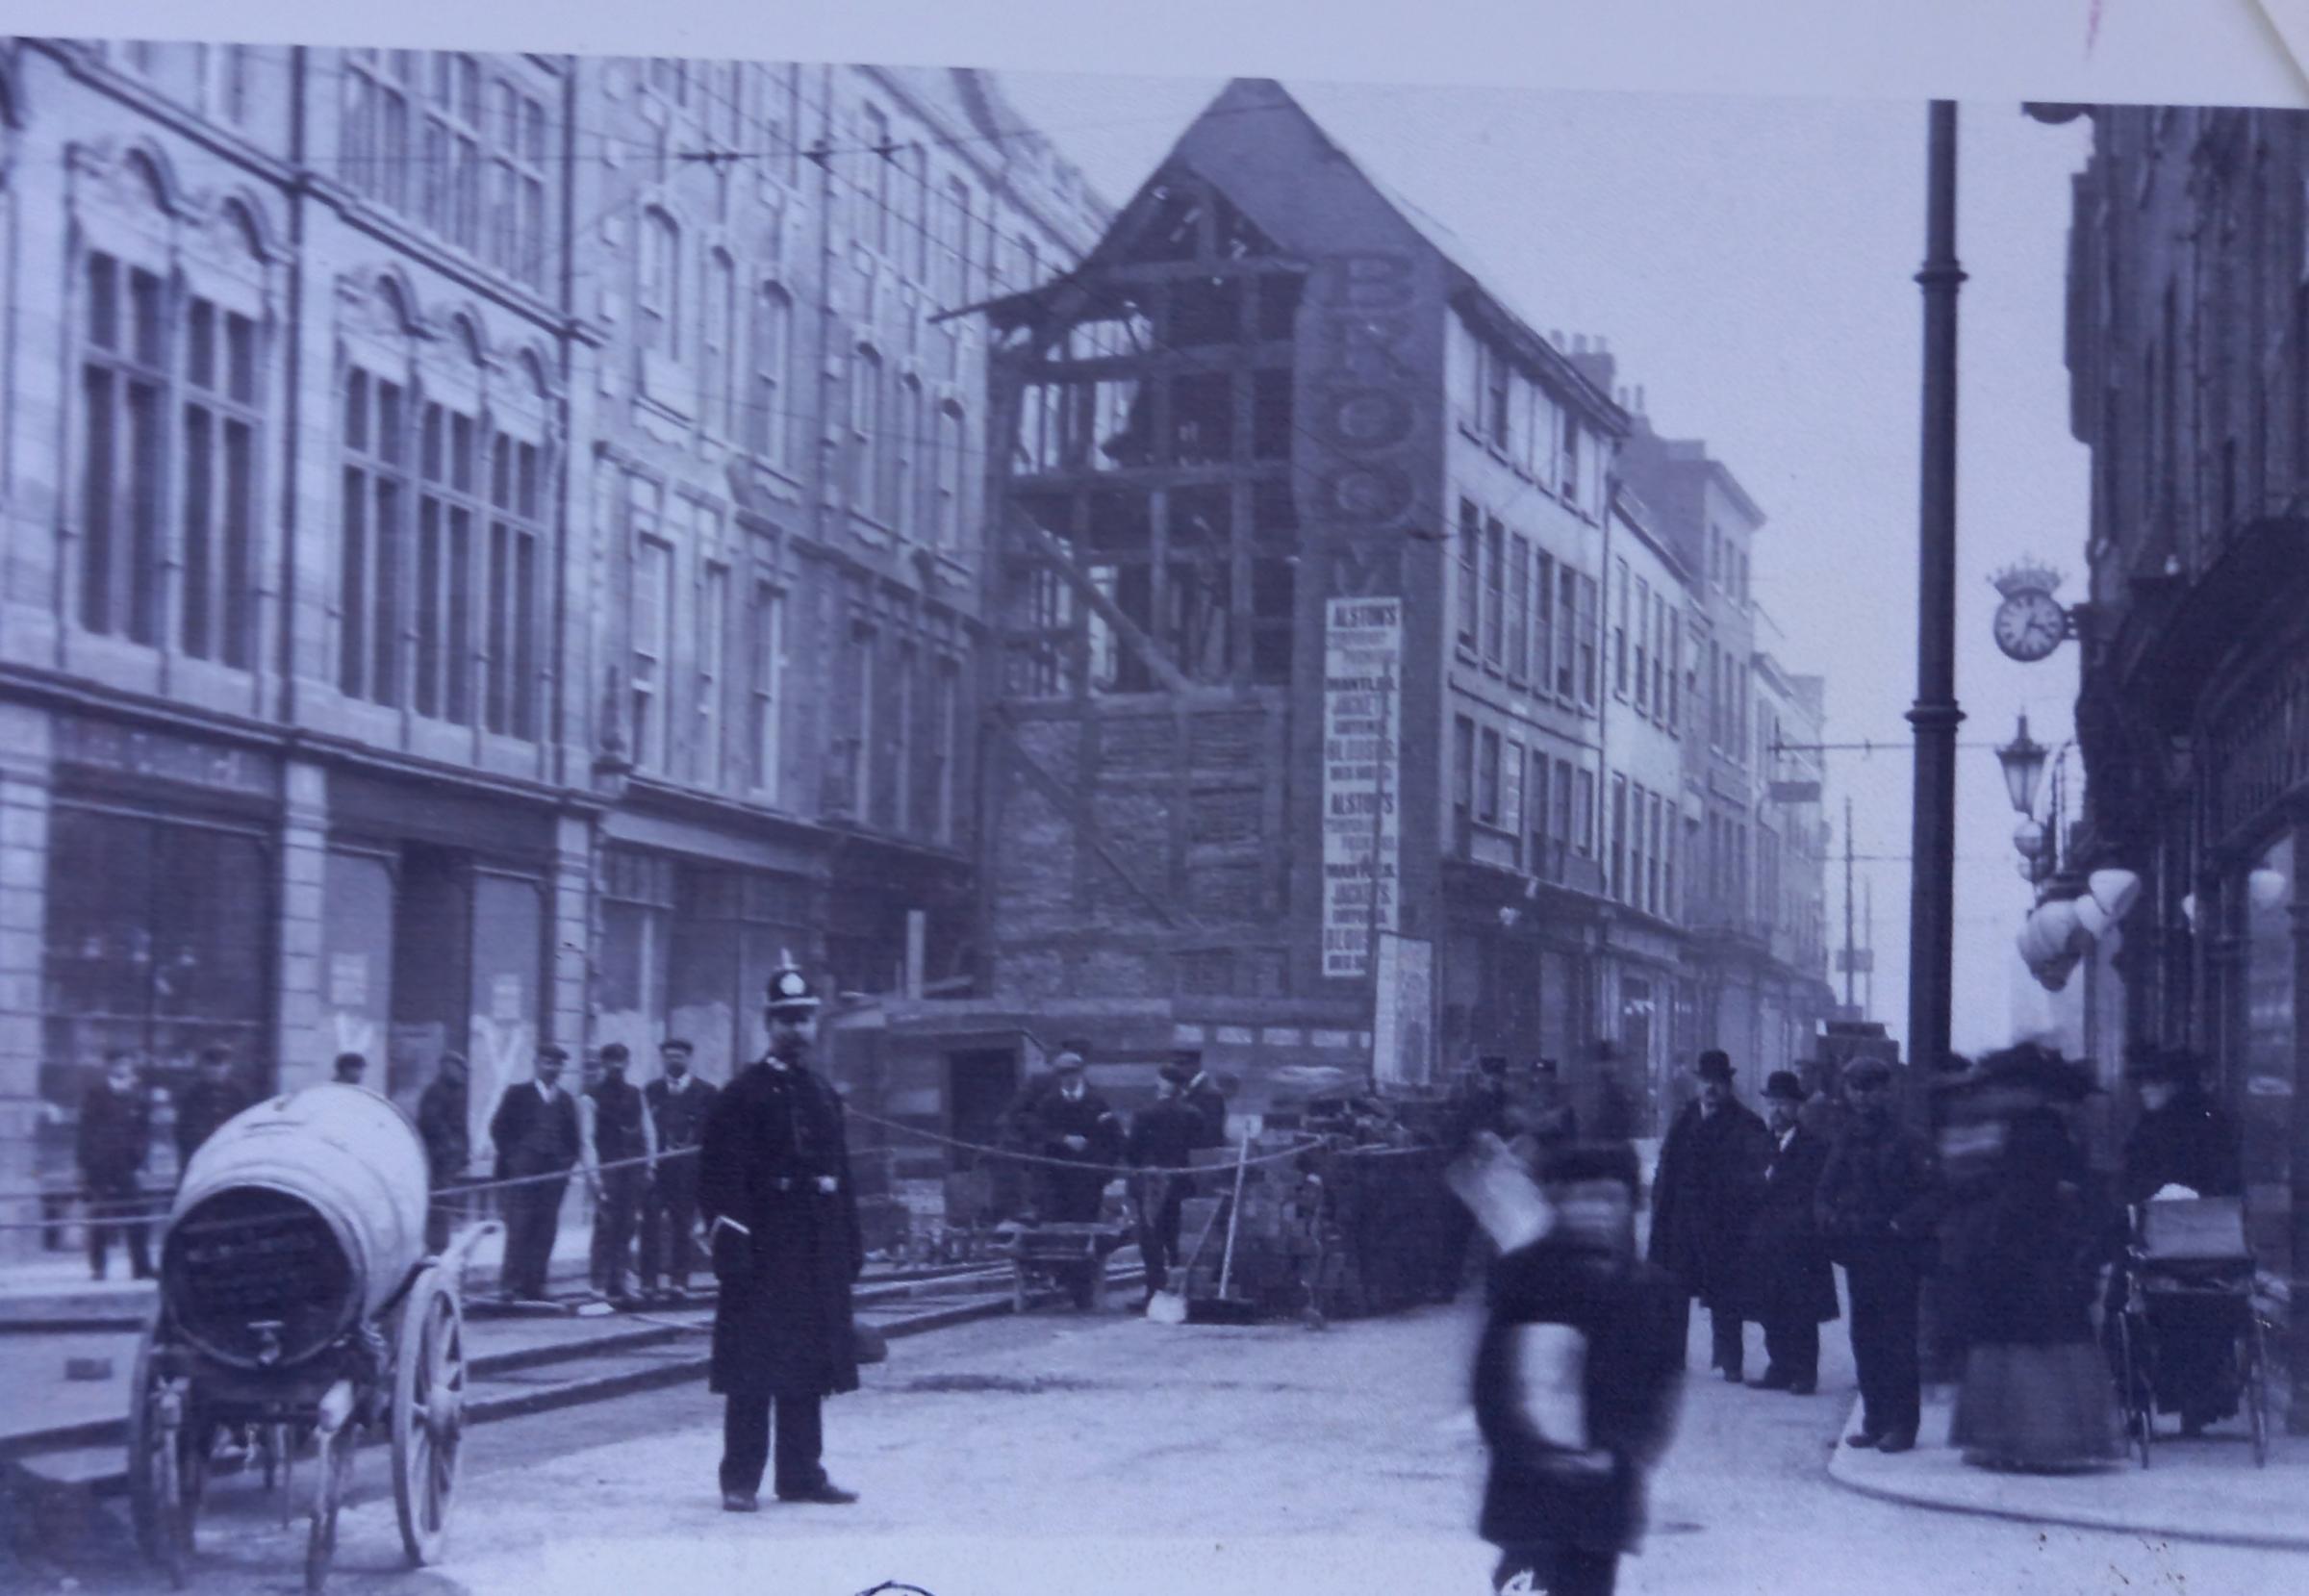 Why were coppers always bigger in those days? The Cross end of High Street before that building was removed in 1903 for road widening to make way for electric trams